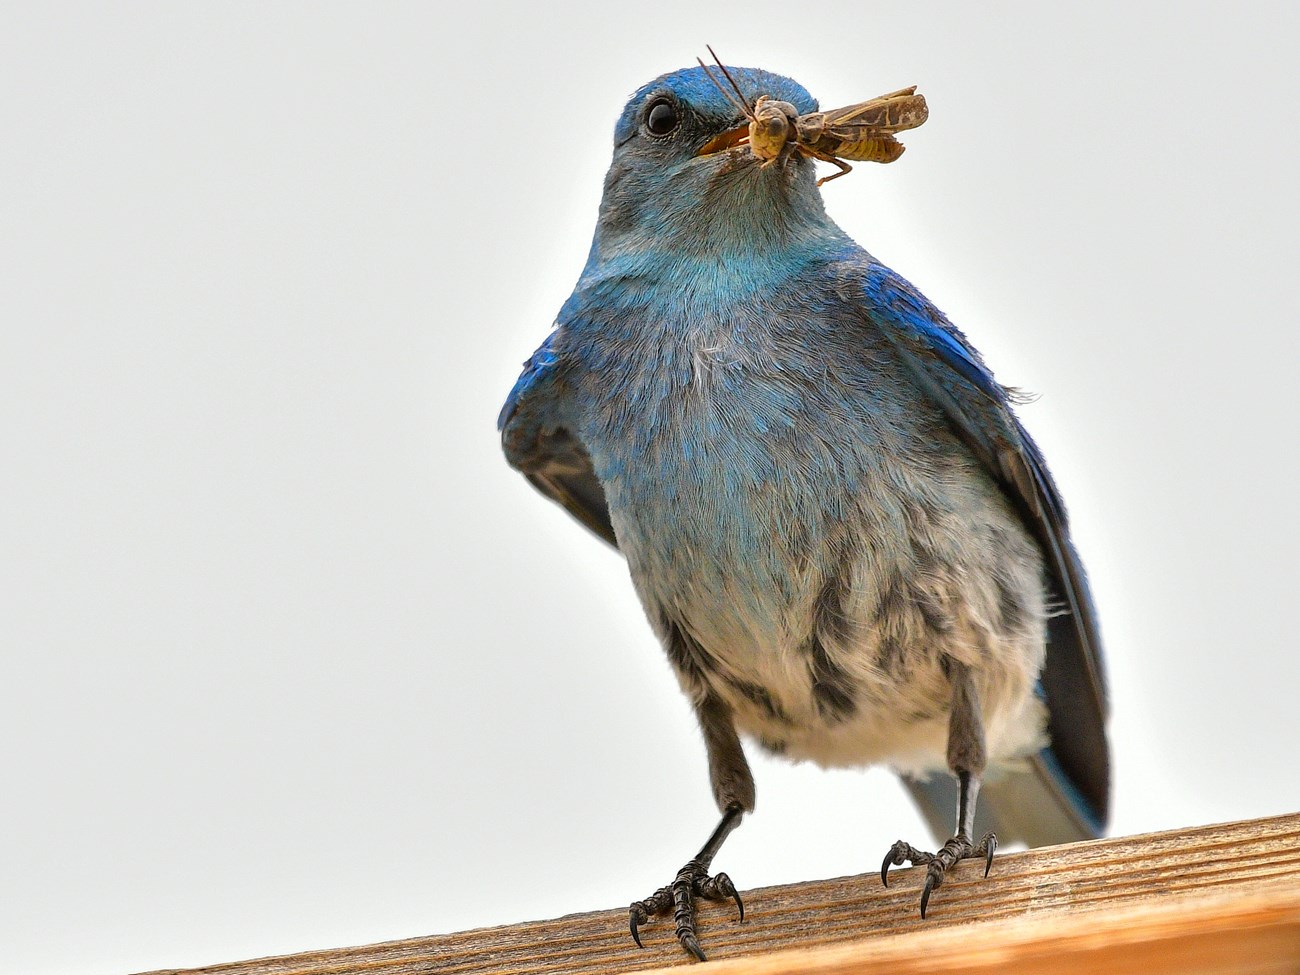 A mountain blue bird with an insect in its mouth